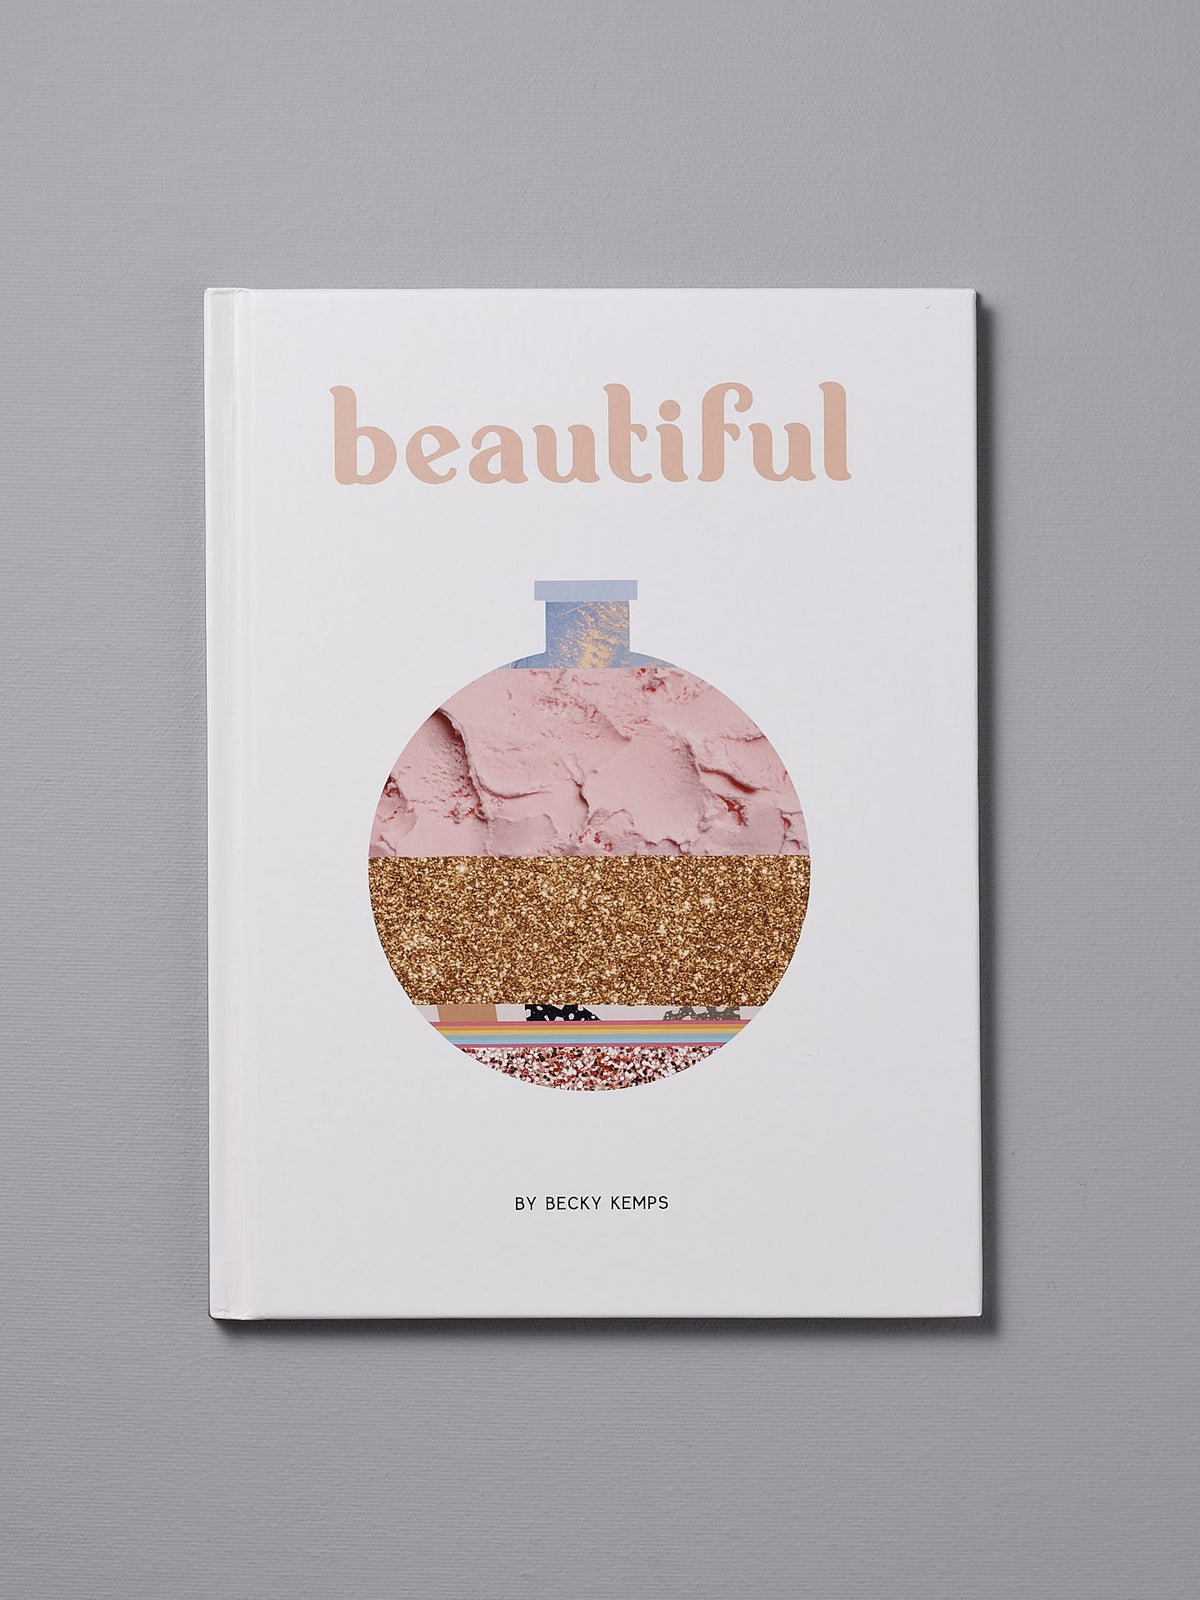 A unique book titled &quot;Beautiful – by Becky Kemps&quot; with a minimalistic cover design featuring abstract layered textures.